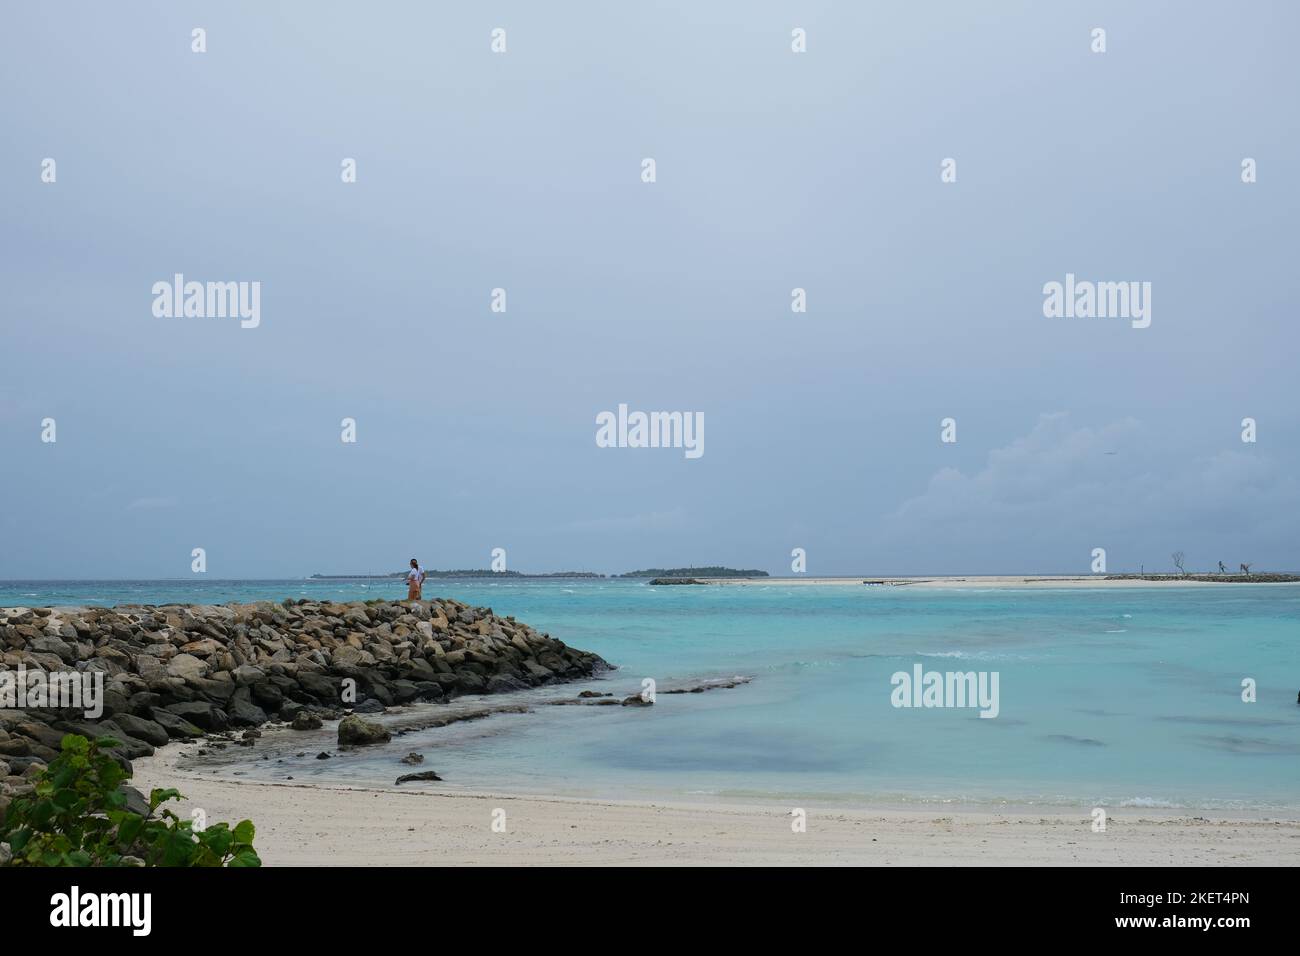 Maafushi is one of the biggest and most popular local islands in Maldives. The beach area during raining season. Stock Photo